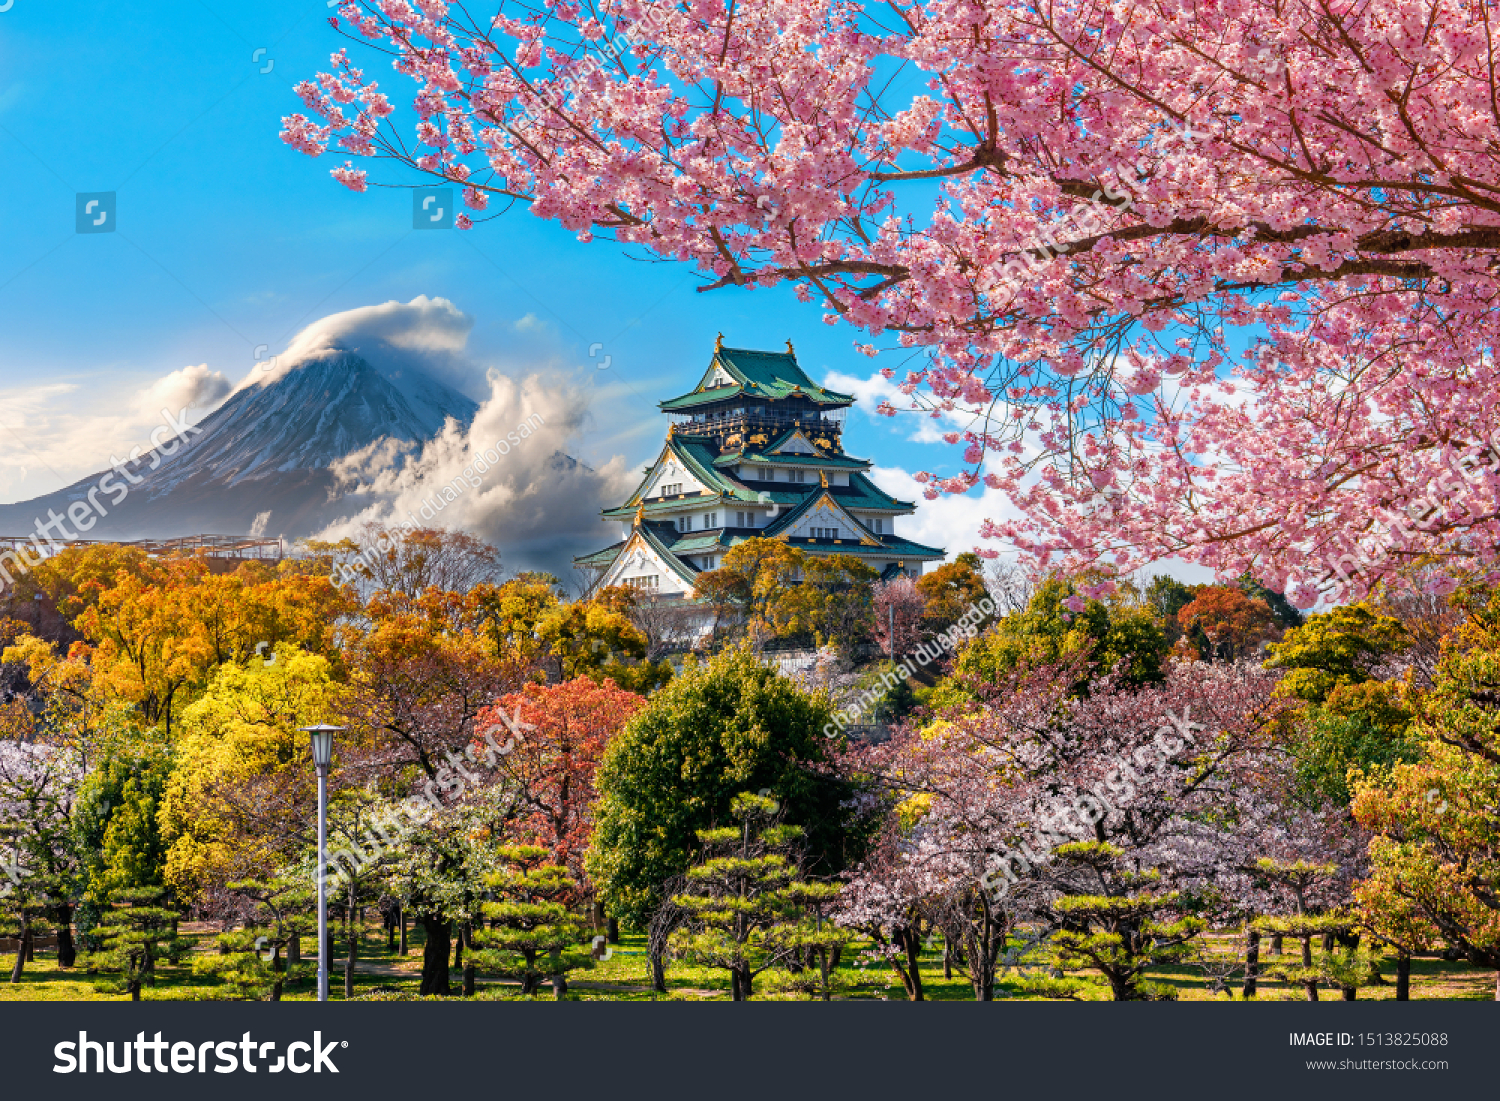  Osaka Castle and full cherry blossom, with Fuji mountain background, Japan #1513825088